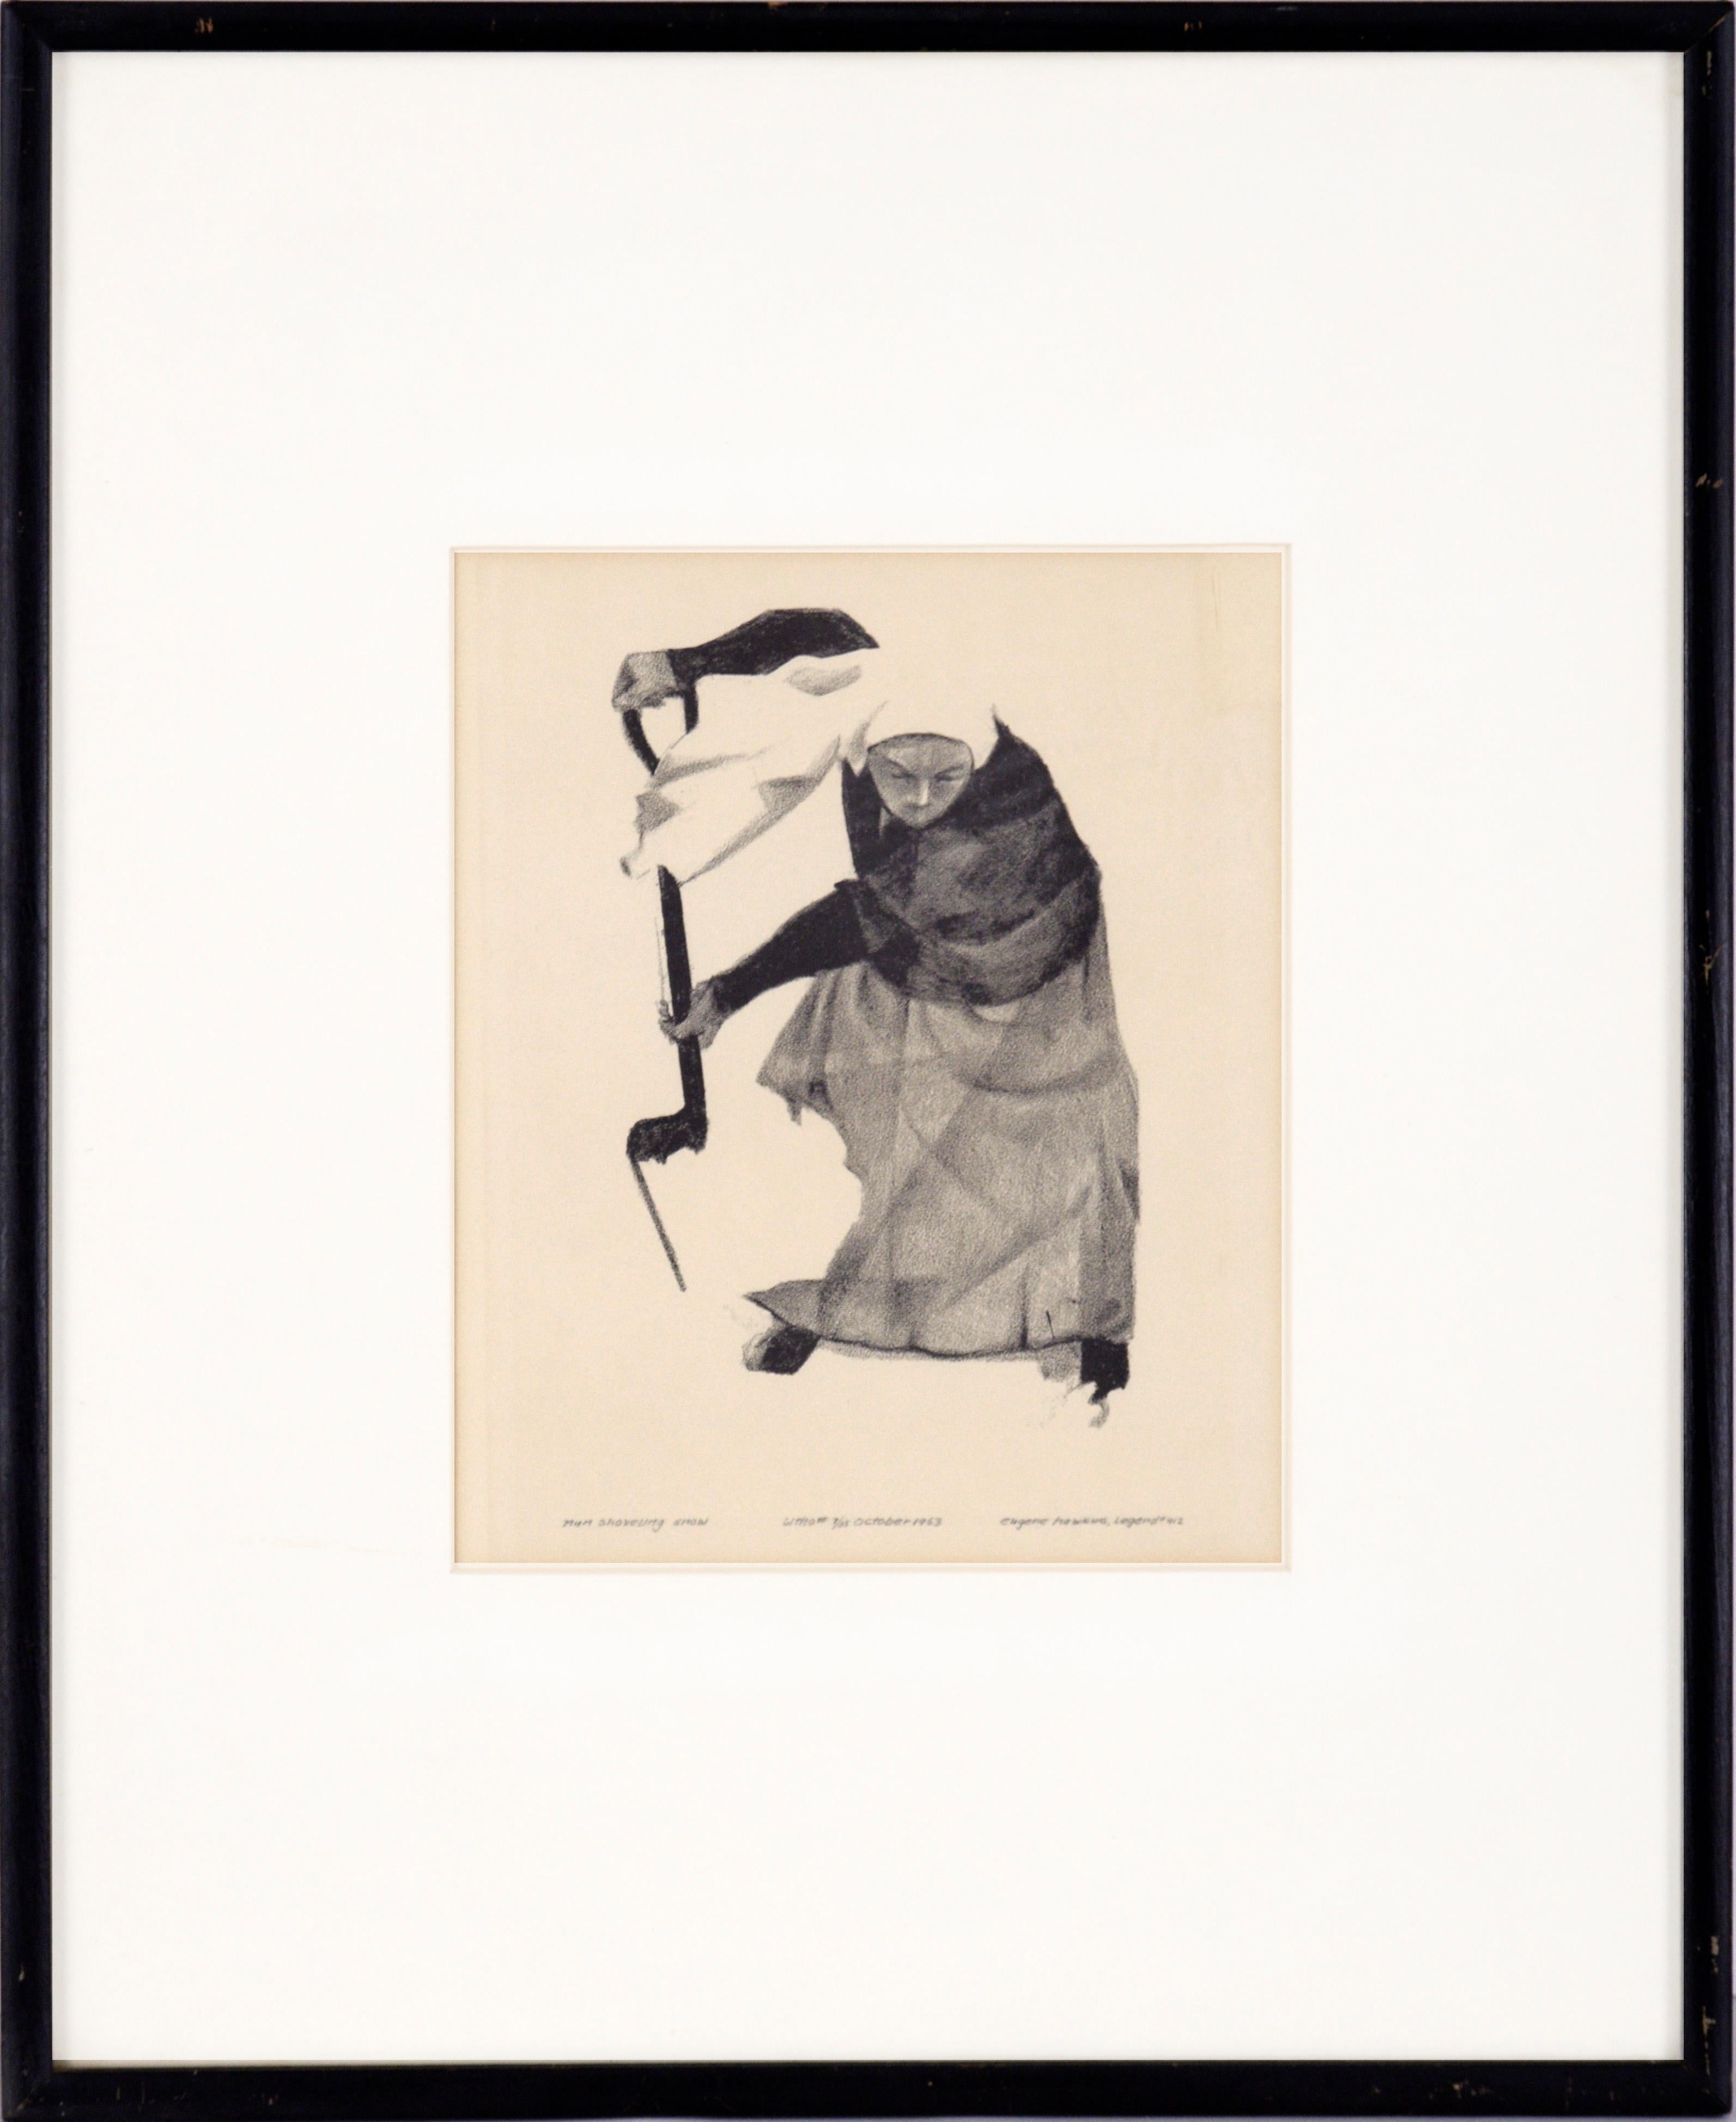 Eugene Hawkins Figurative Print - "Nun Shoveling Snow" - Rare Signed Figurative Lithograph in Ink on Paper